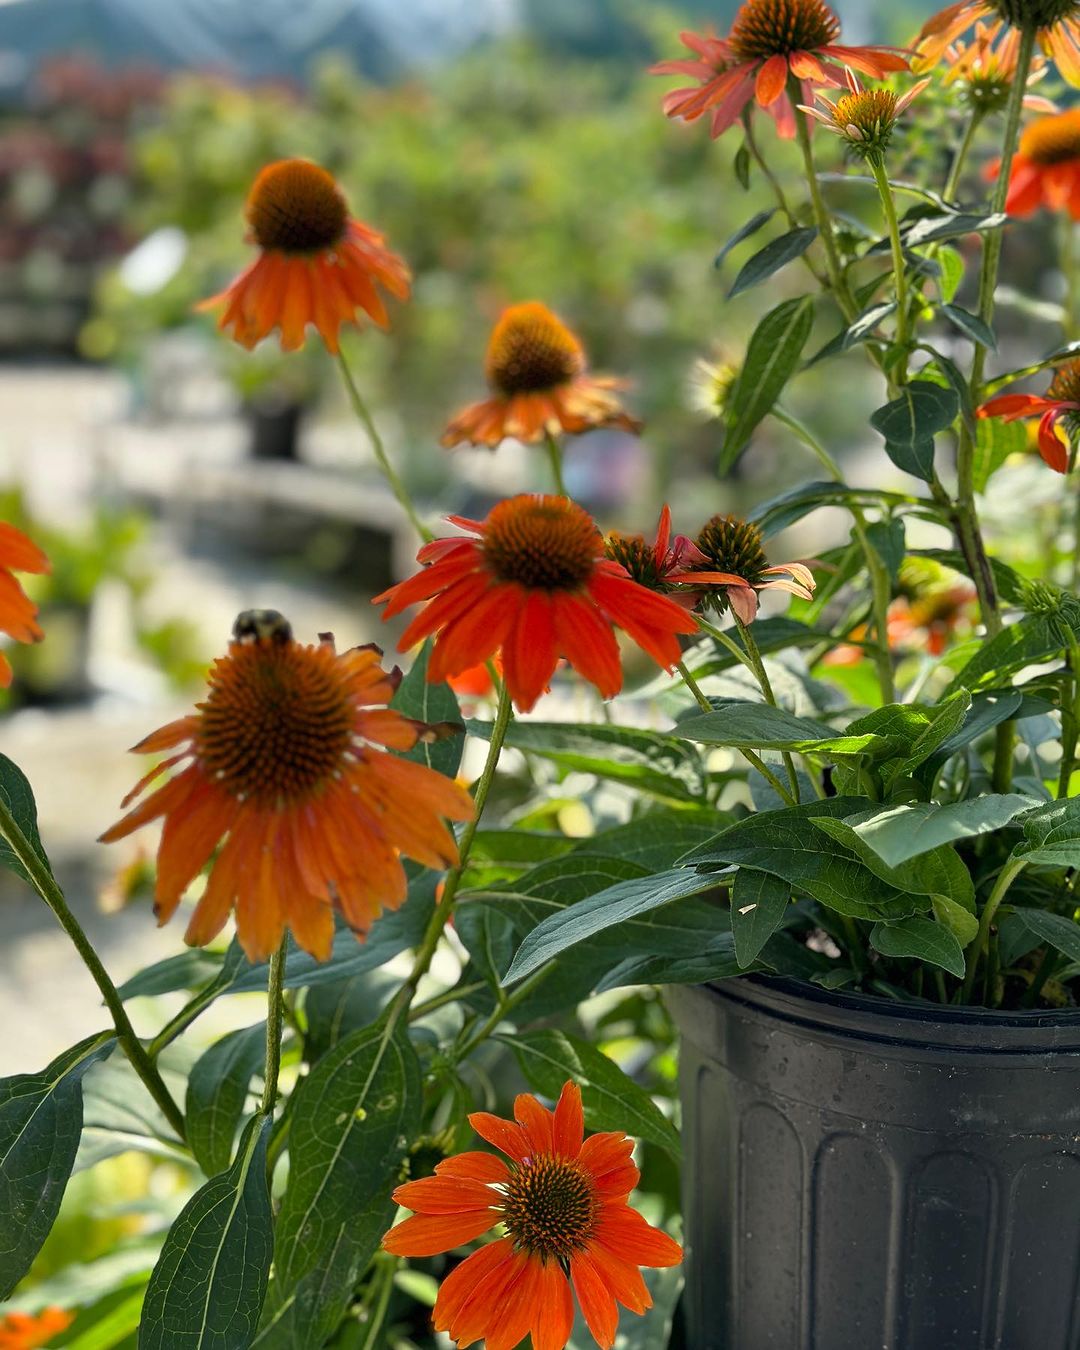 Orange coneflower, a vibrant flower with Orange petals and a cone-shaped center, symbolizing beauty and resilience.